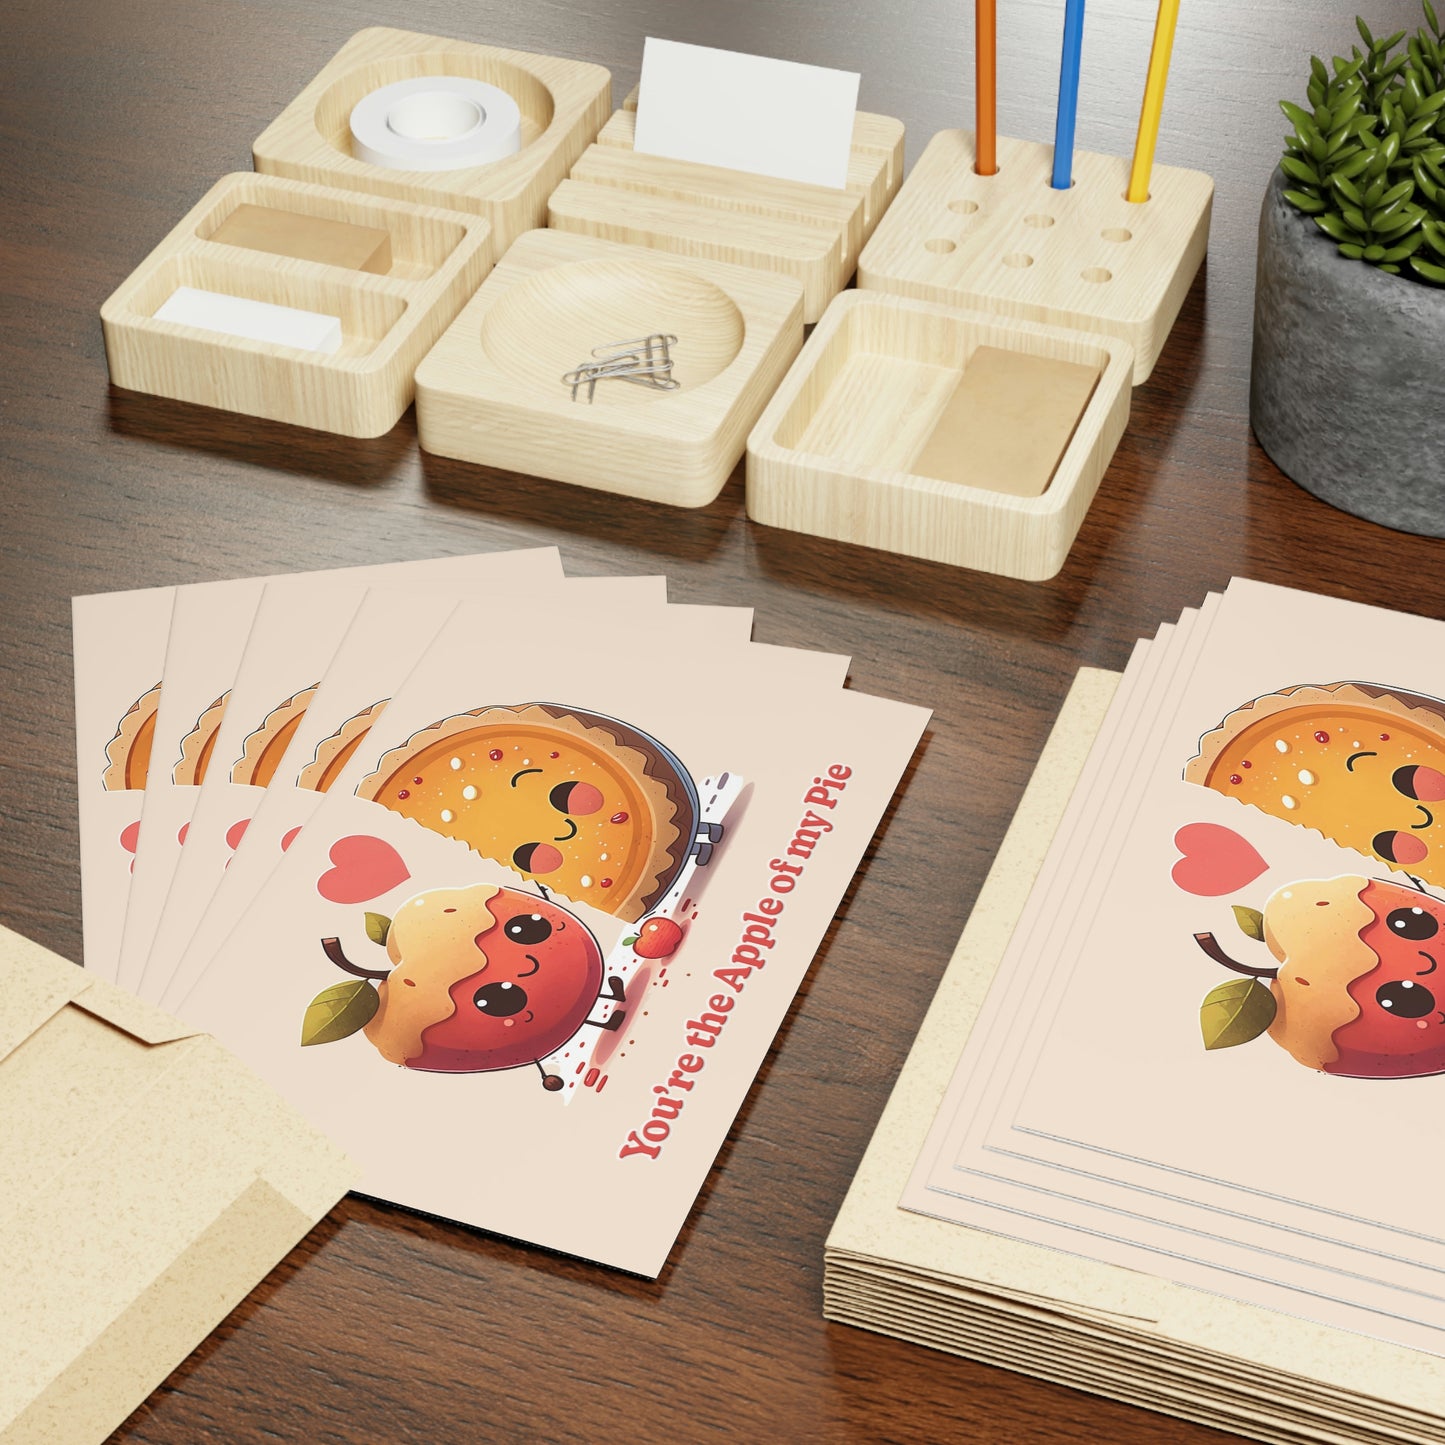 Apple of my Pie Greeting Cards (1 or 10-pcs)